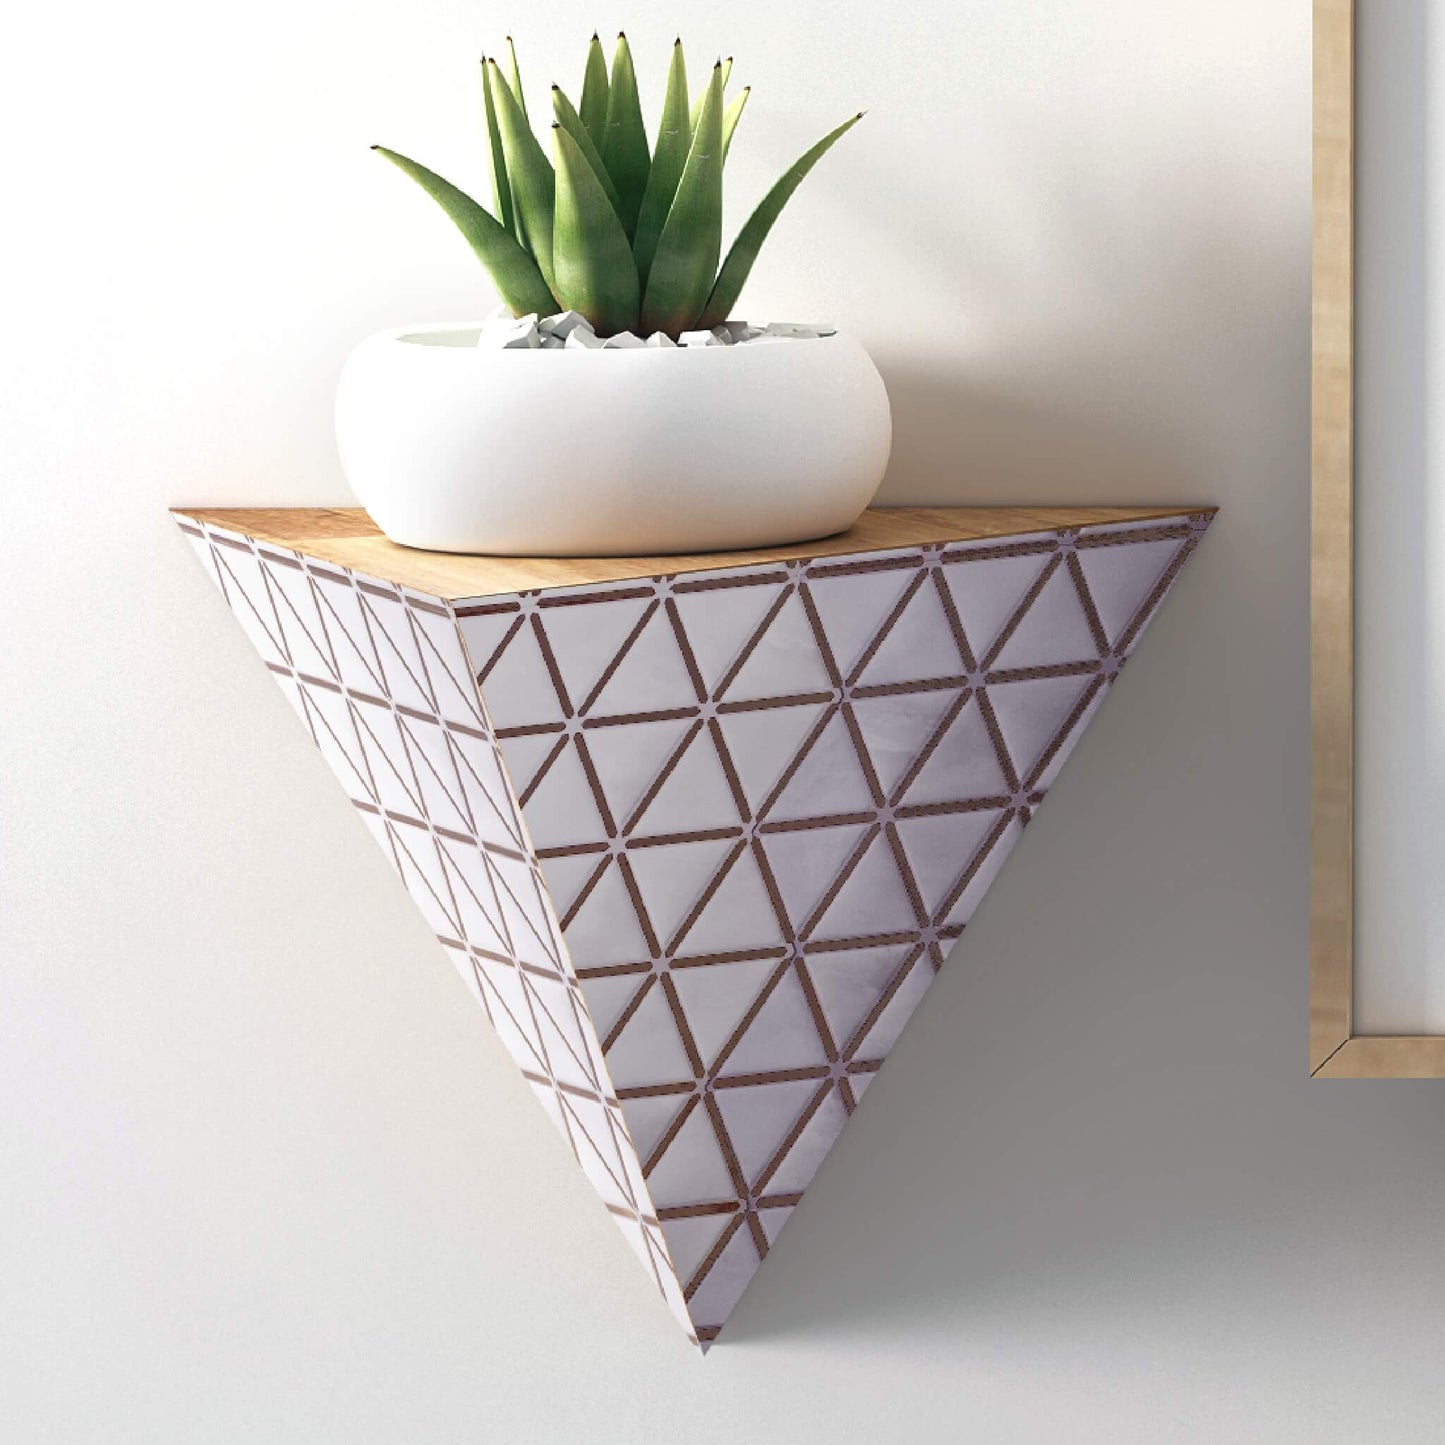 Rose Gold Triangles Tile Decal